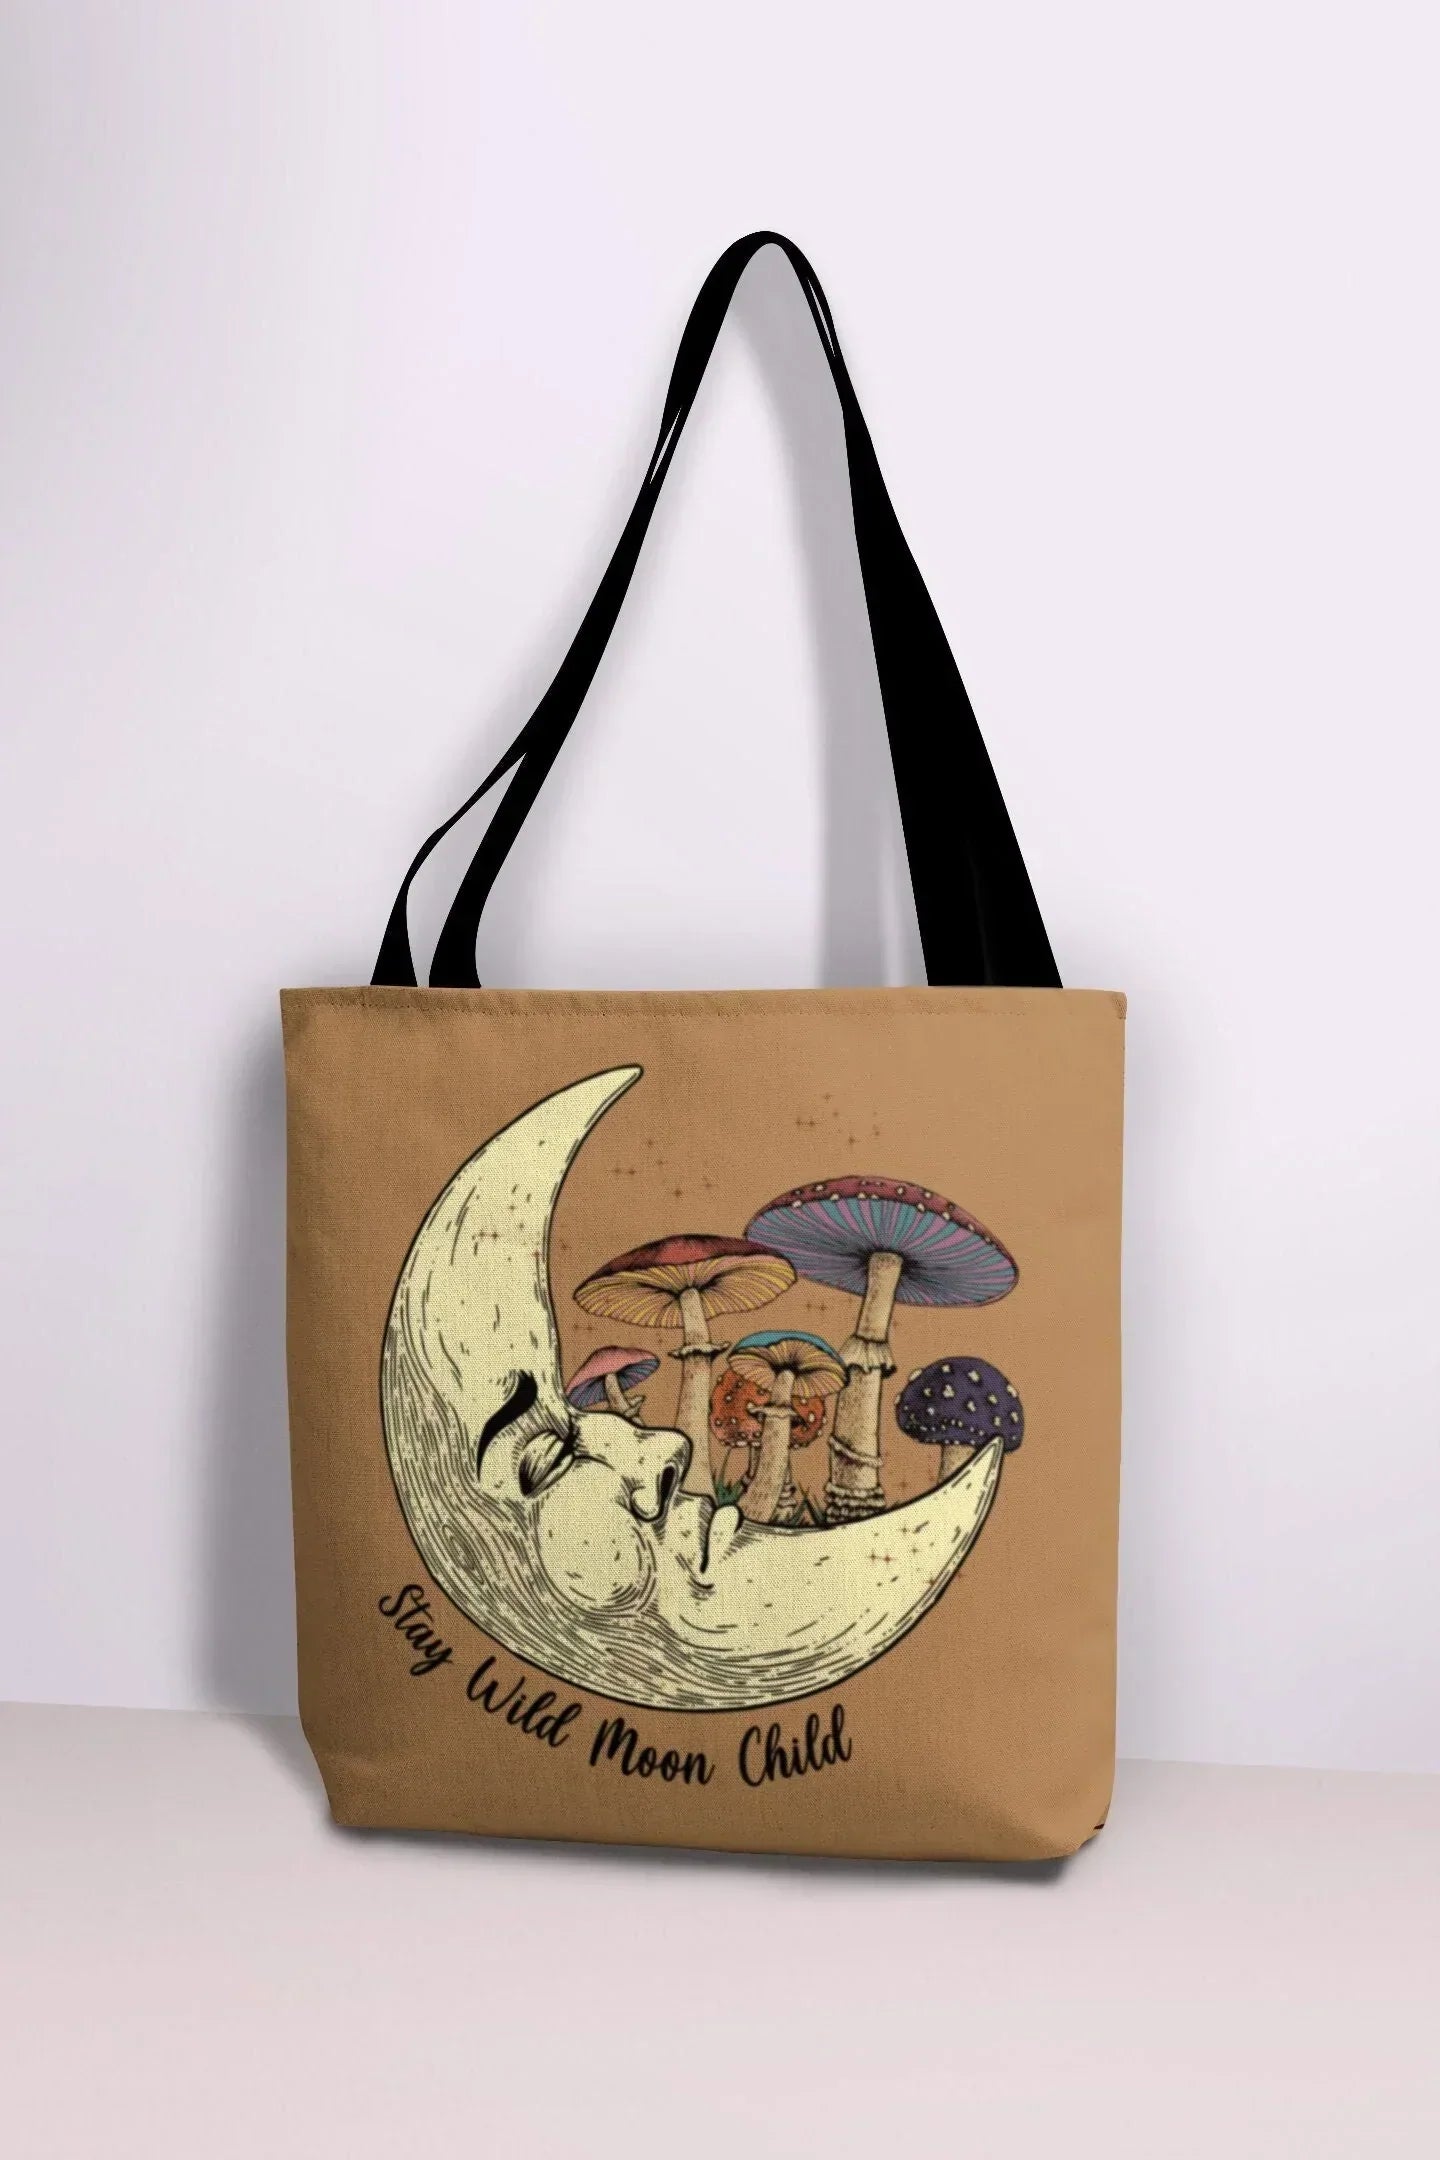 Stay Wild Moon Child, Mushroom Tote Bag, Mushroom Lovers Gifts, Reusable Canvas Bag, Hippie Psychedelic Gift HMDesignStudioUS